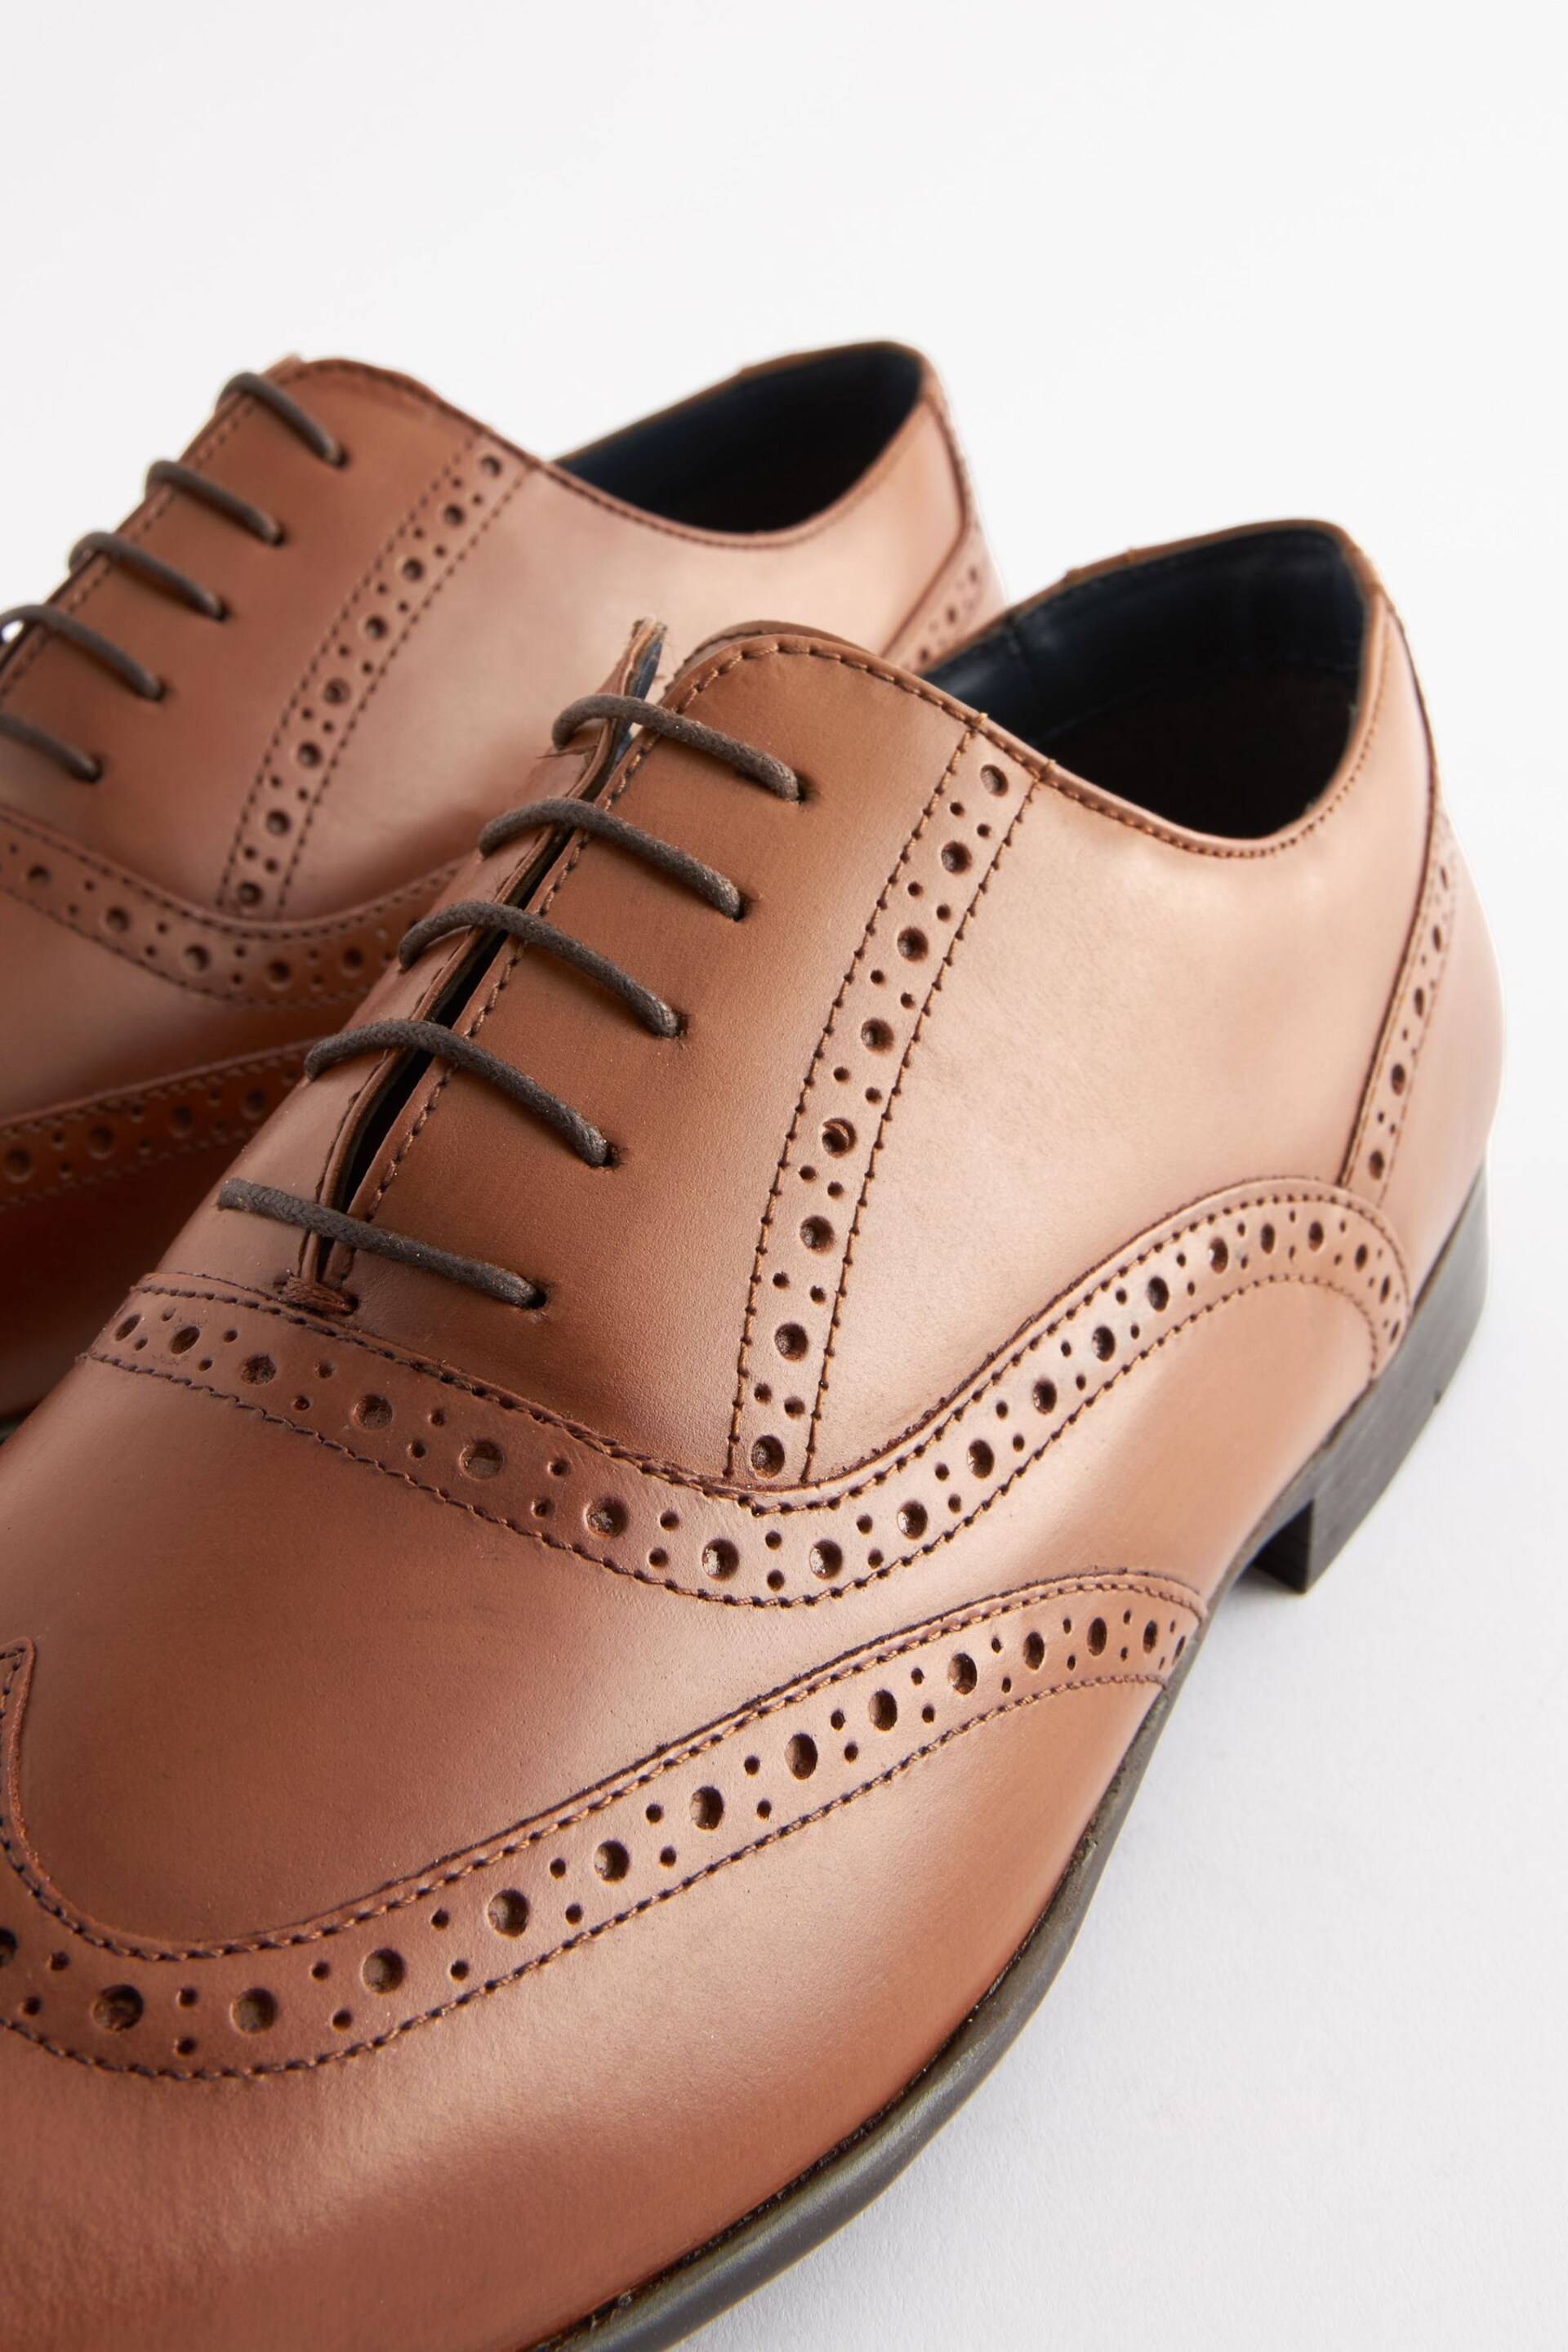 Tan Brown Wide Fit Leather Oxford Brogue Shoes - Image 3 of 6